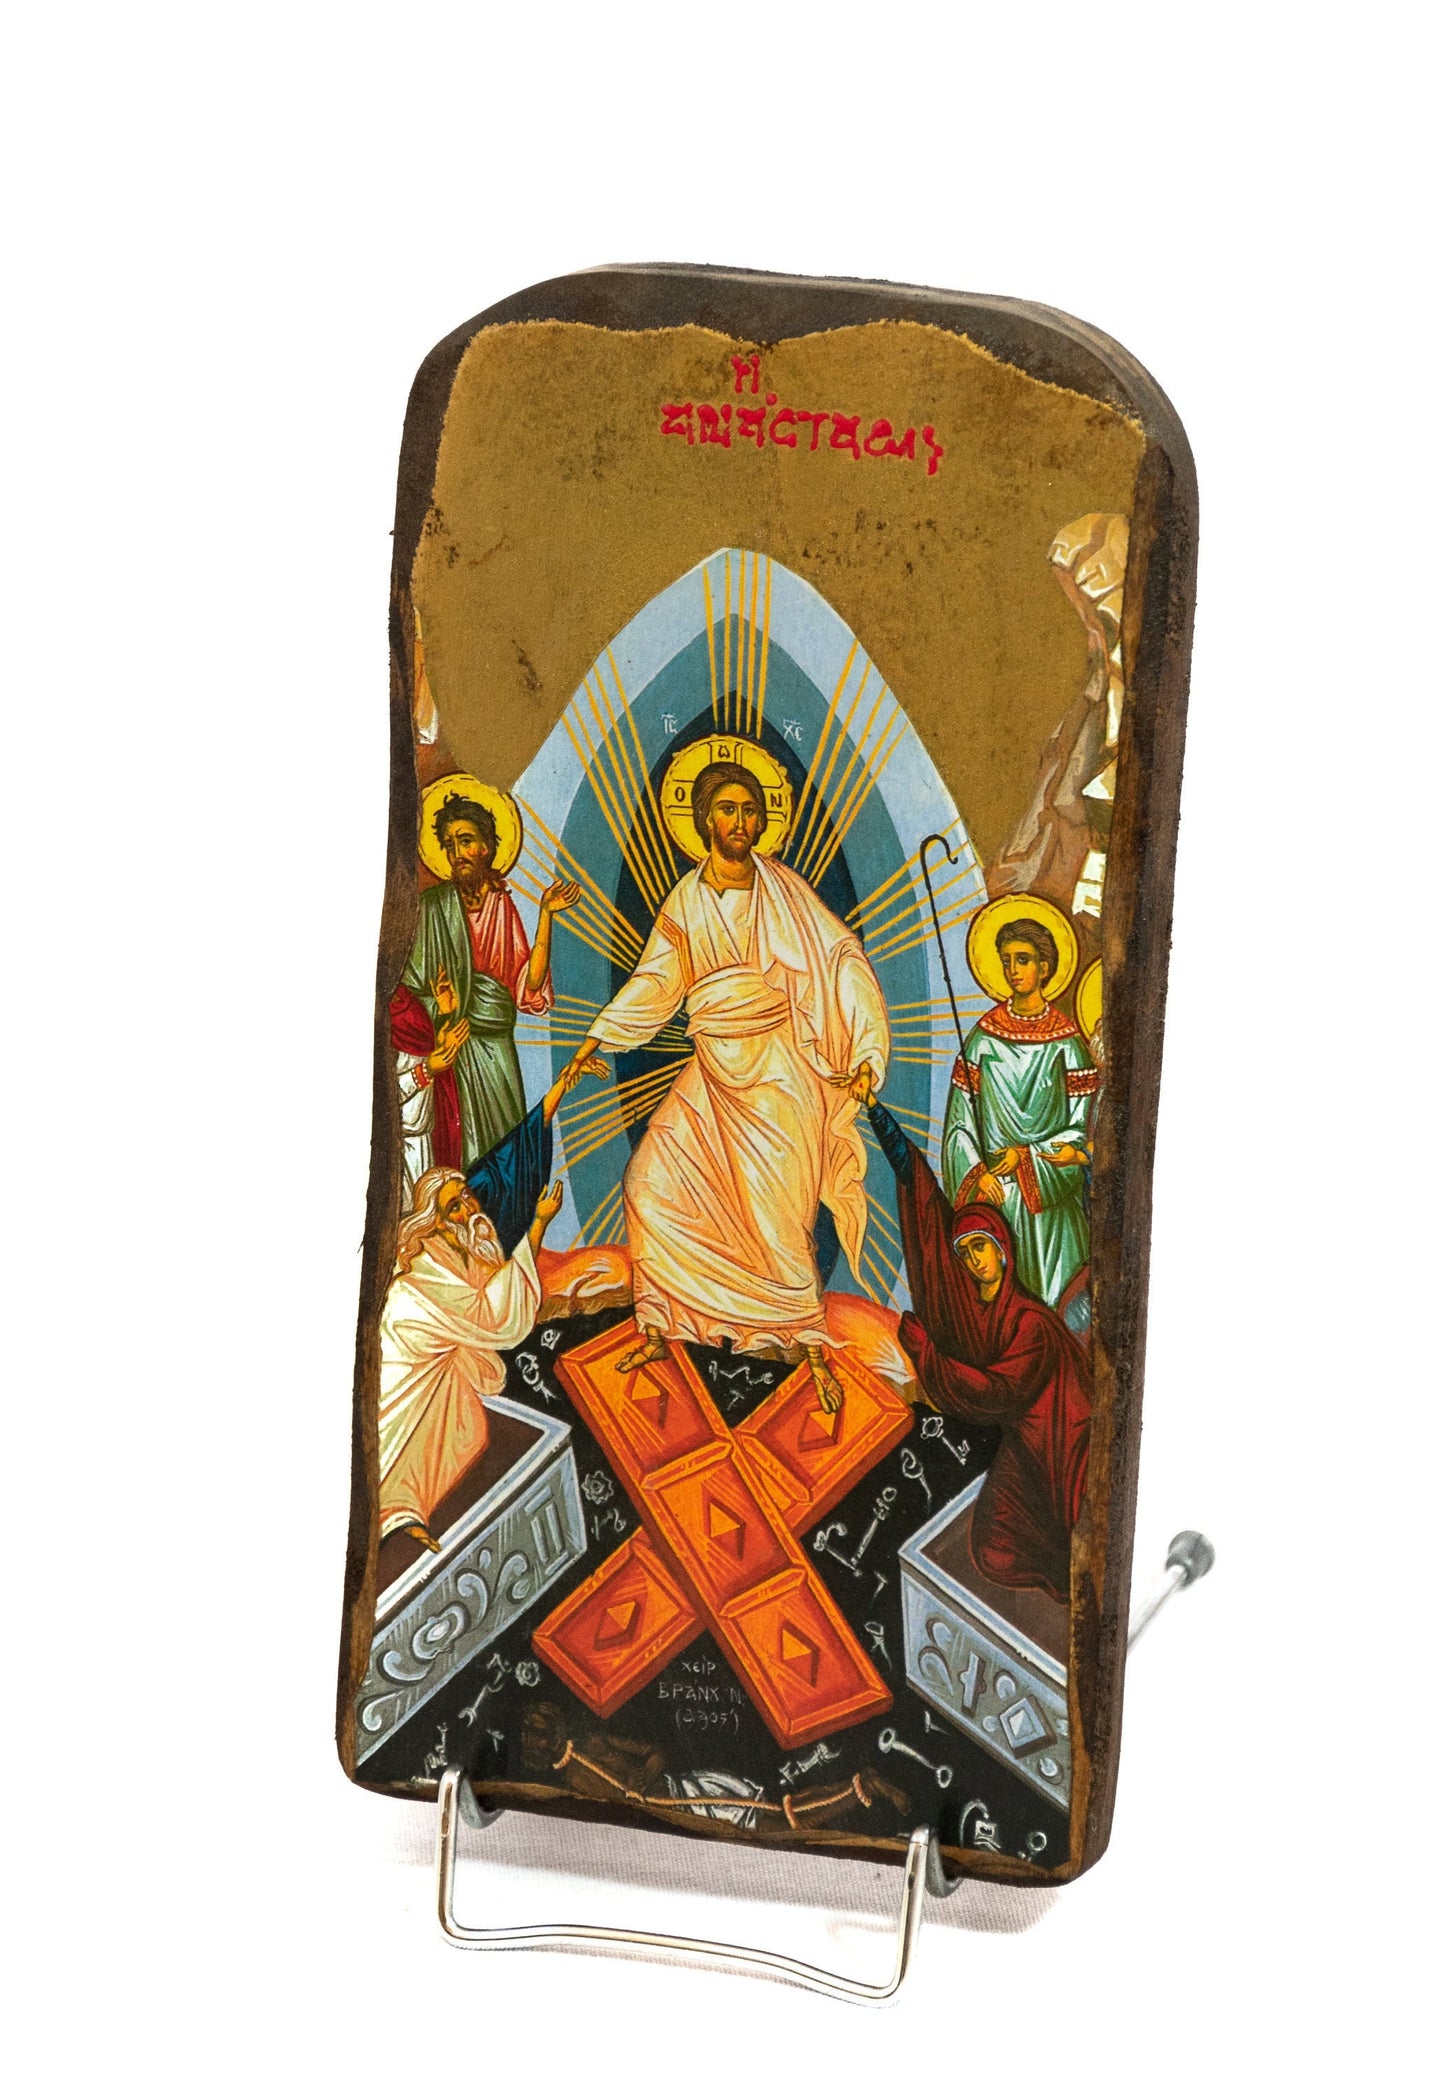 Resurrection Jesus Christ icon, Greek Christian Orthodox Icon of Anastasi, Byzantine icon of our Lord rising from the dead, religious gift TheHolyArt